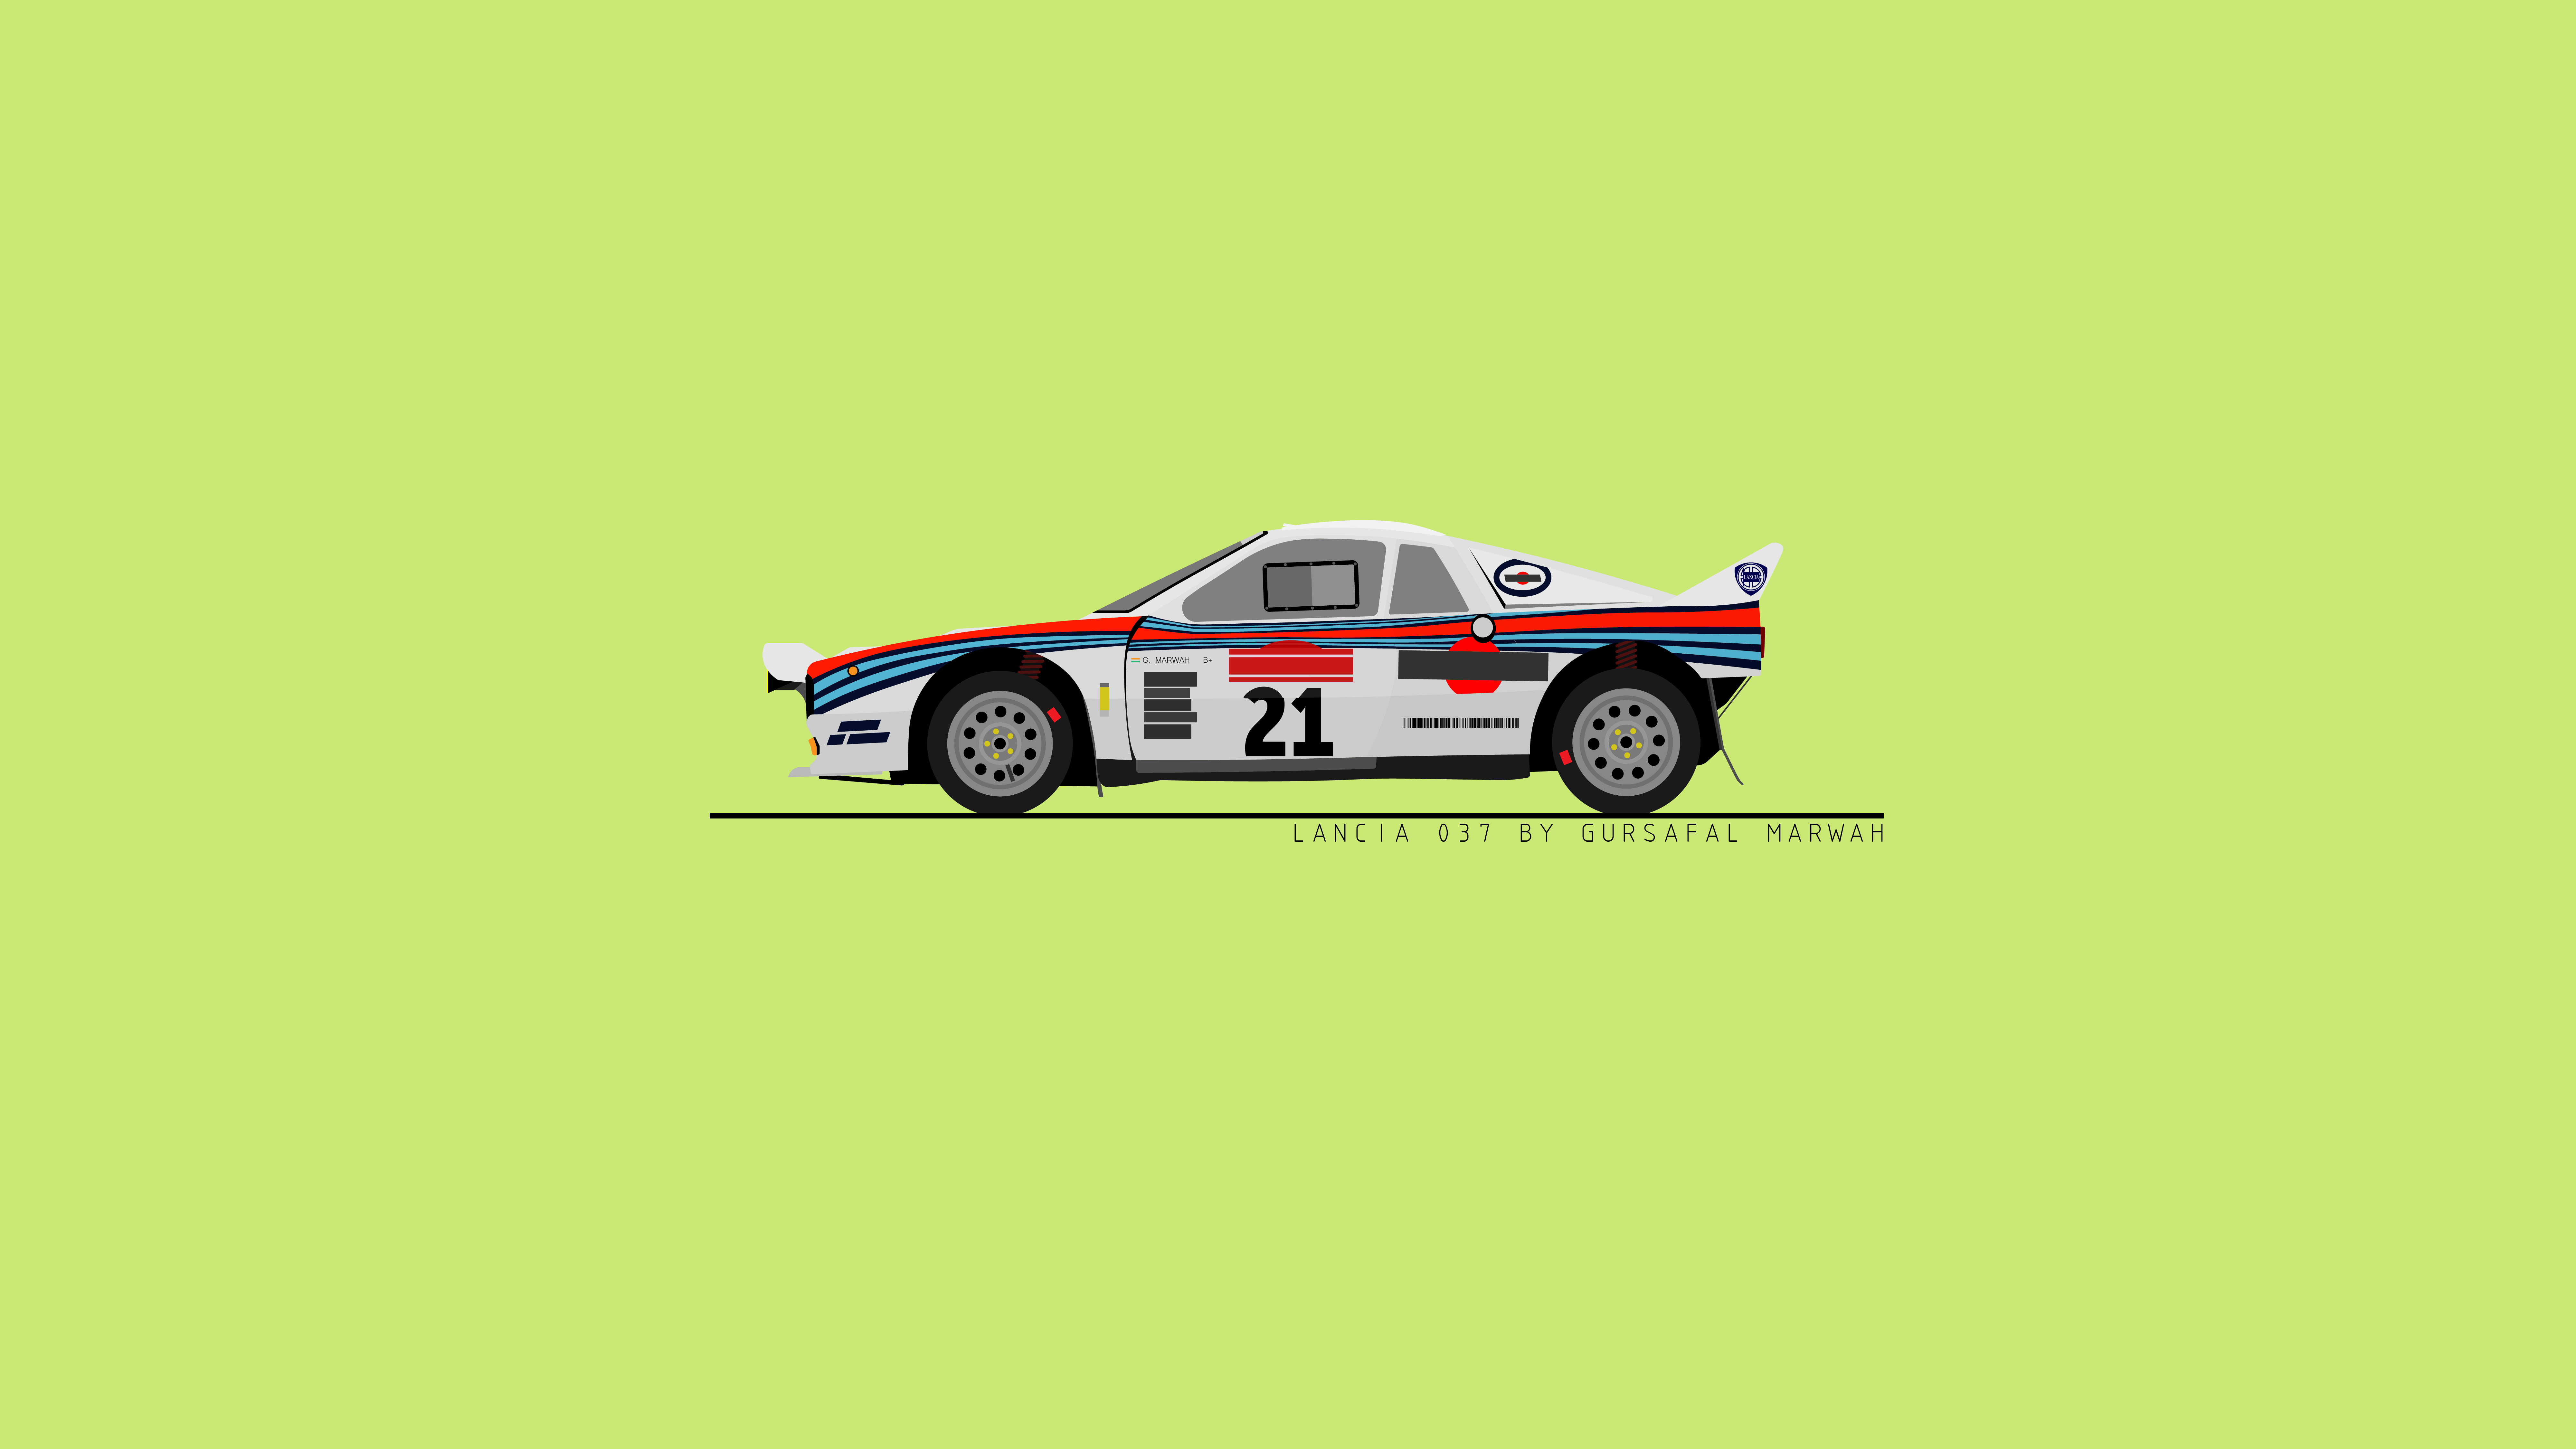 Lancia k wallpapers for your desktop or mobile screen free and easy to download